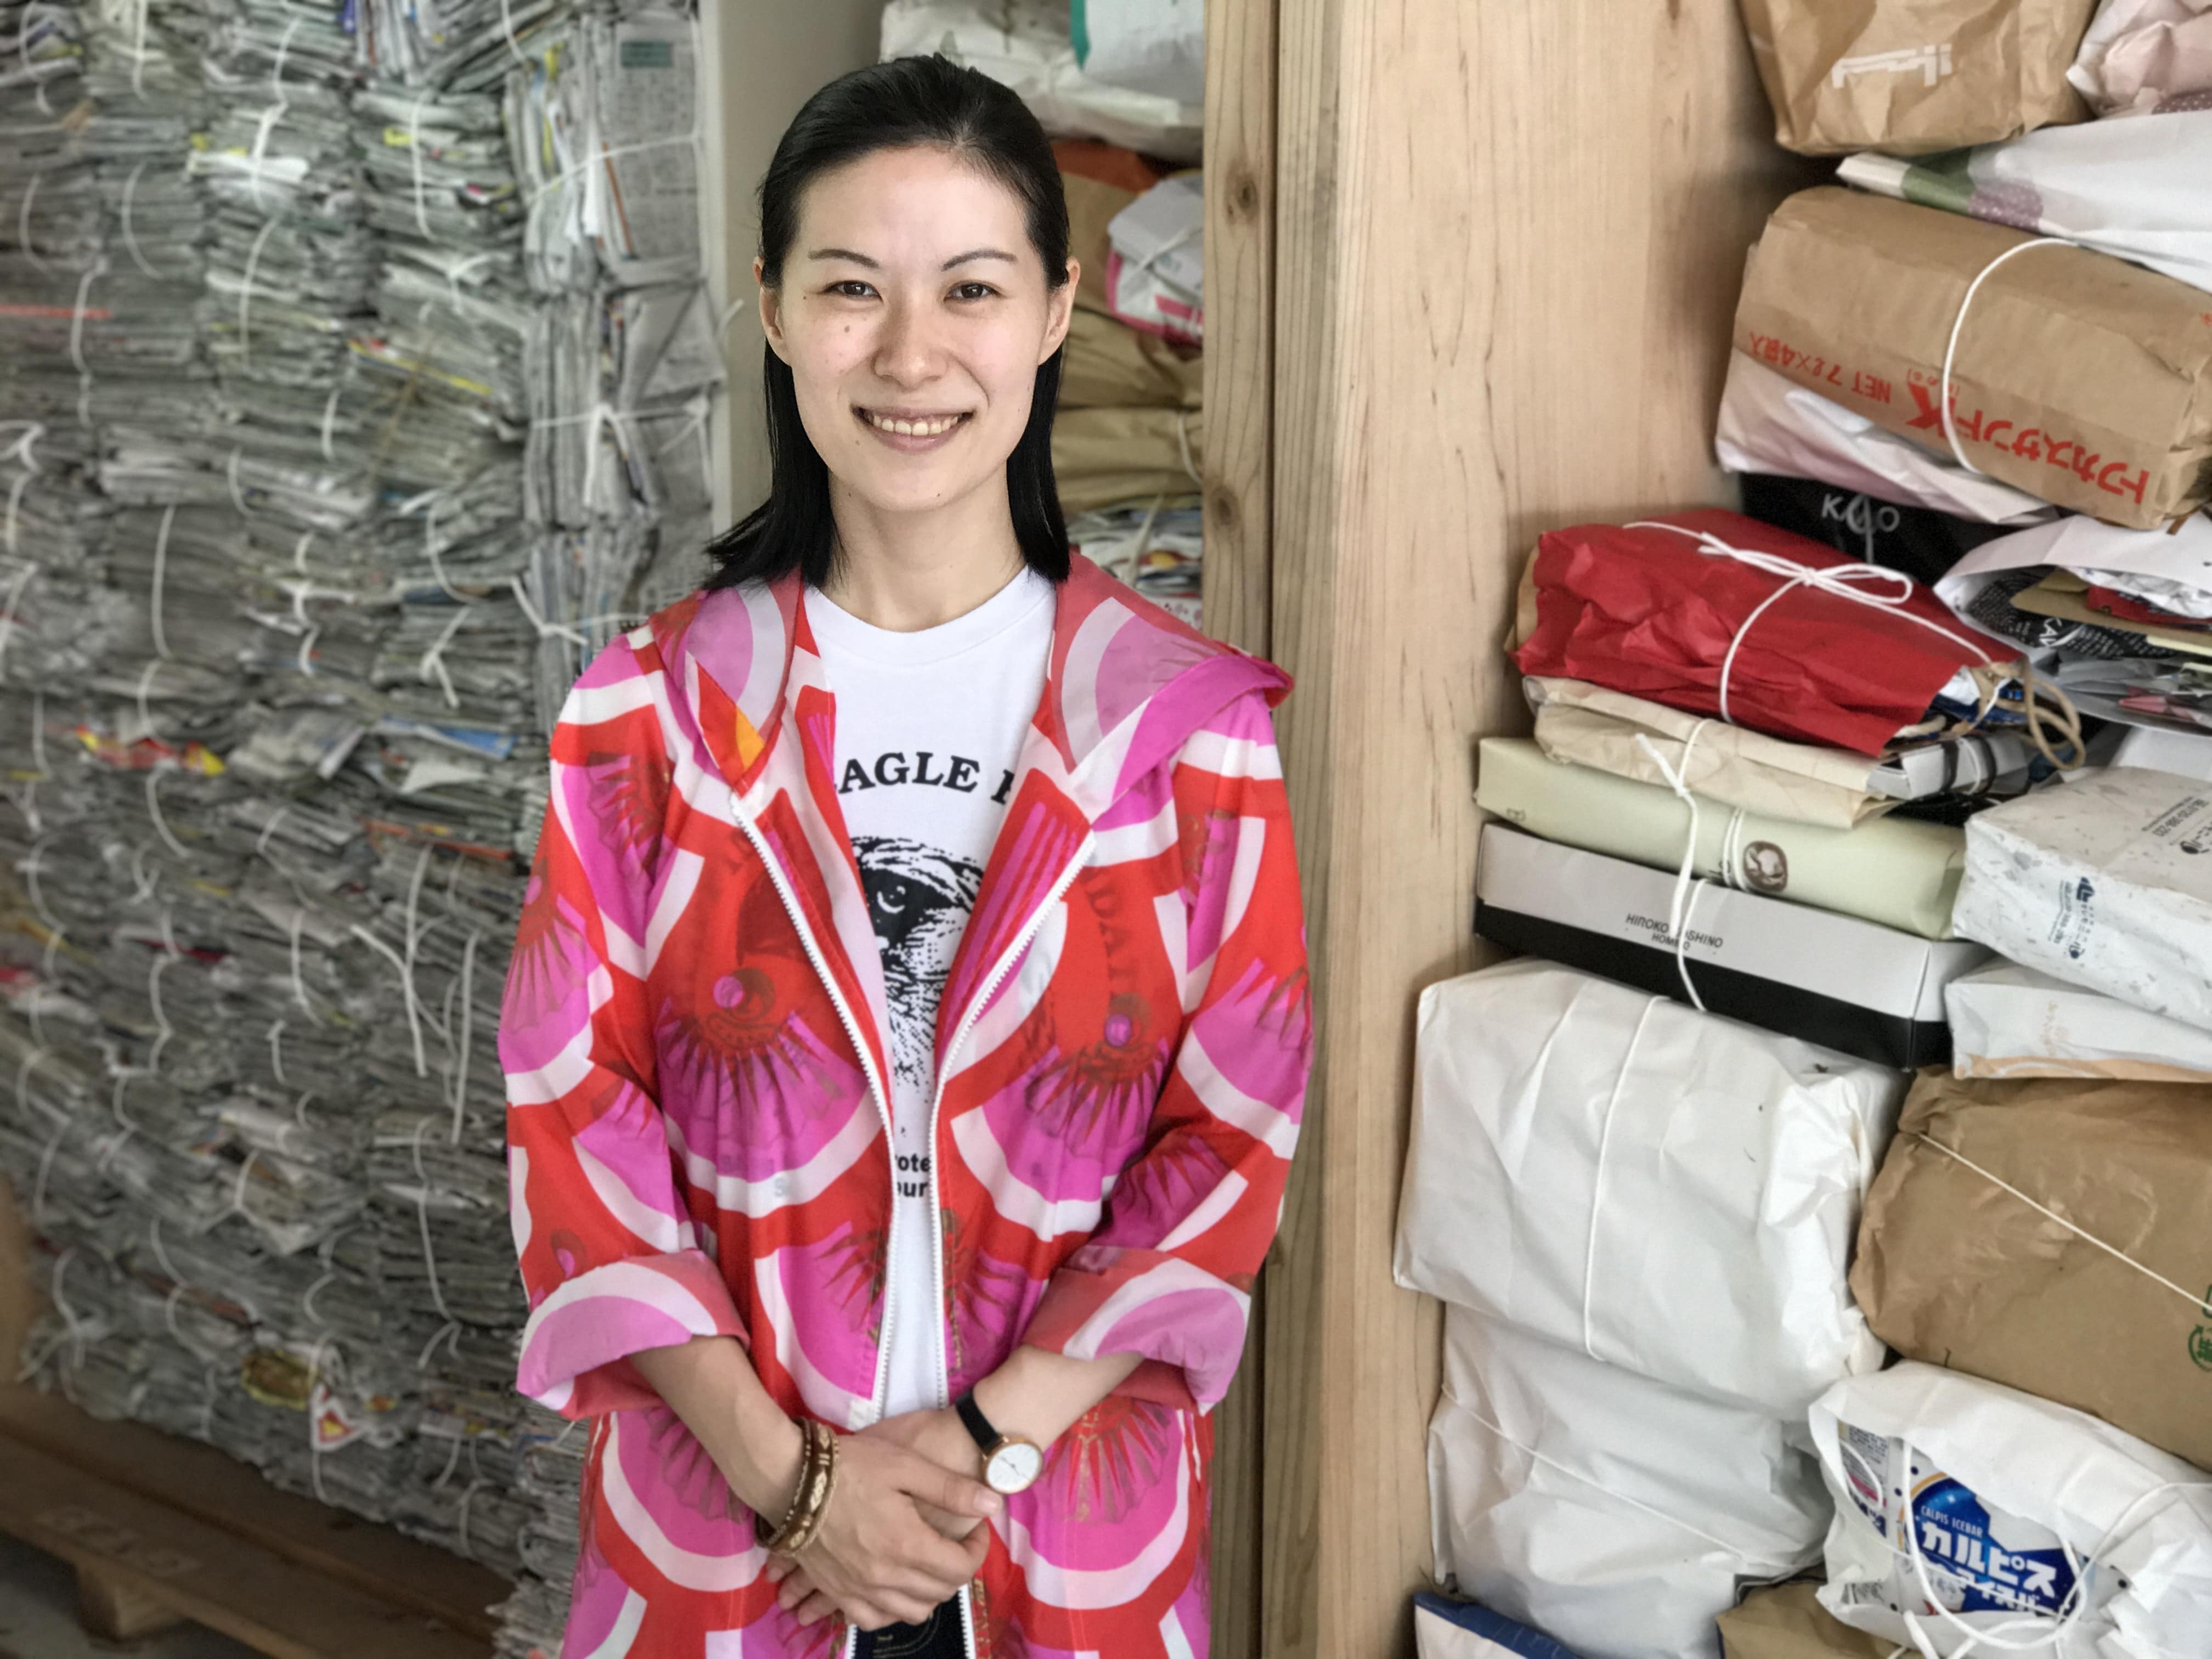 She says it takes time to get people to buy in, but once they learn, there’s no going back. “Japan has, of course — good or bad — this kind of social pressure,” she says. “If everyone’s doing it, then maybe you need to do it. That’s a social pressure, so that’s partially pushing us forward.”People get used to the new way of doing things and change their customs. “Once custom is changed, it becomes habit,” she adds.